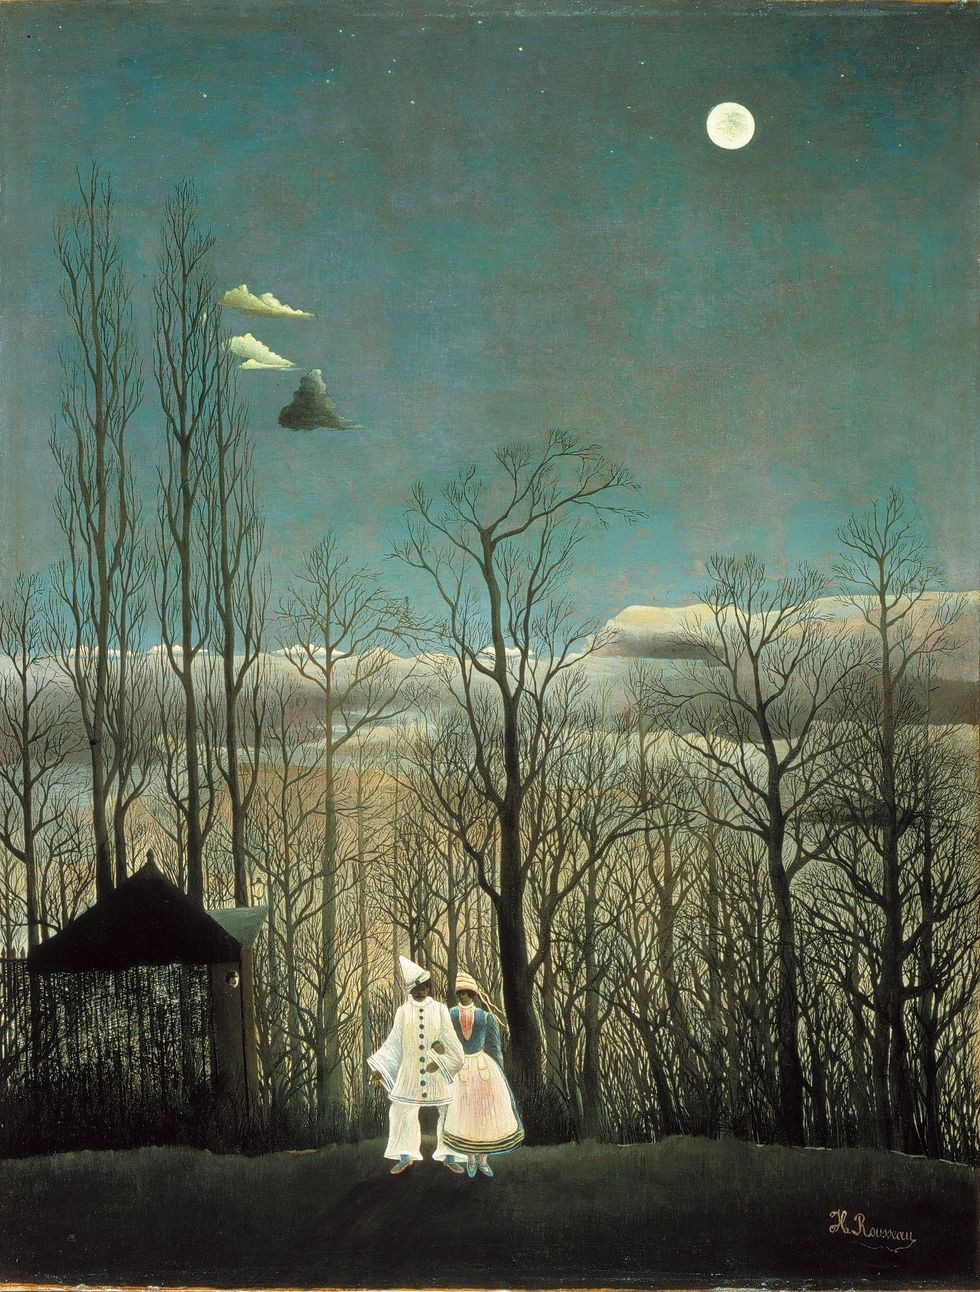 An Analysis Of Carnival Evening By Henri Rousseau